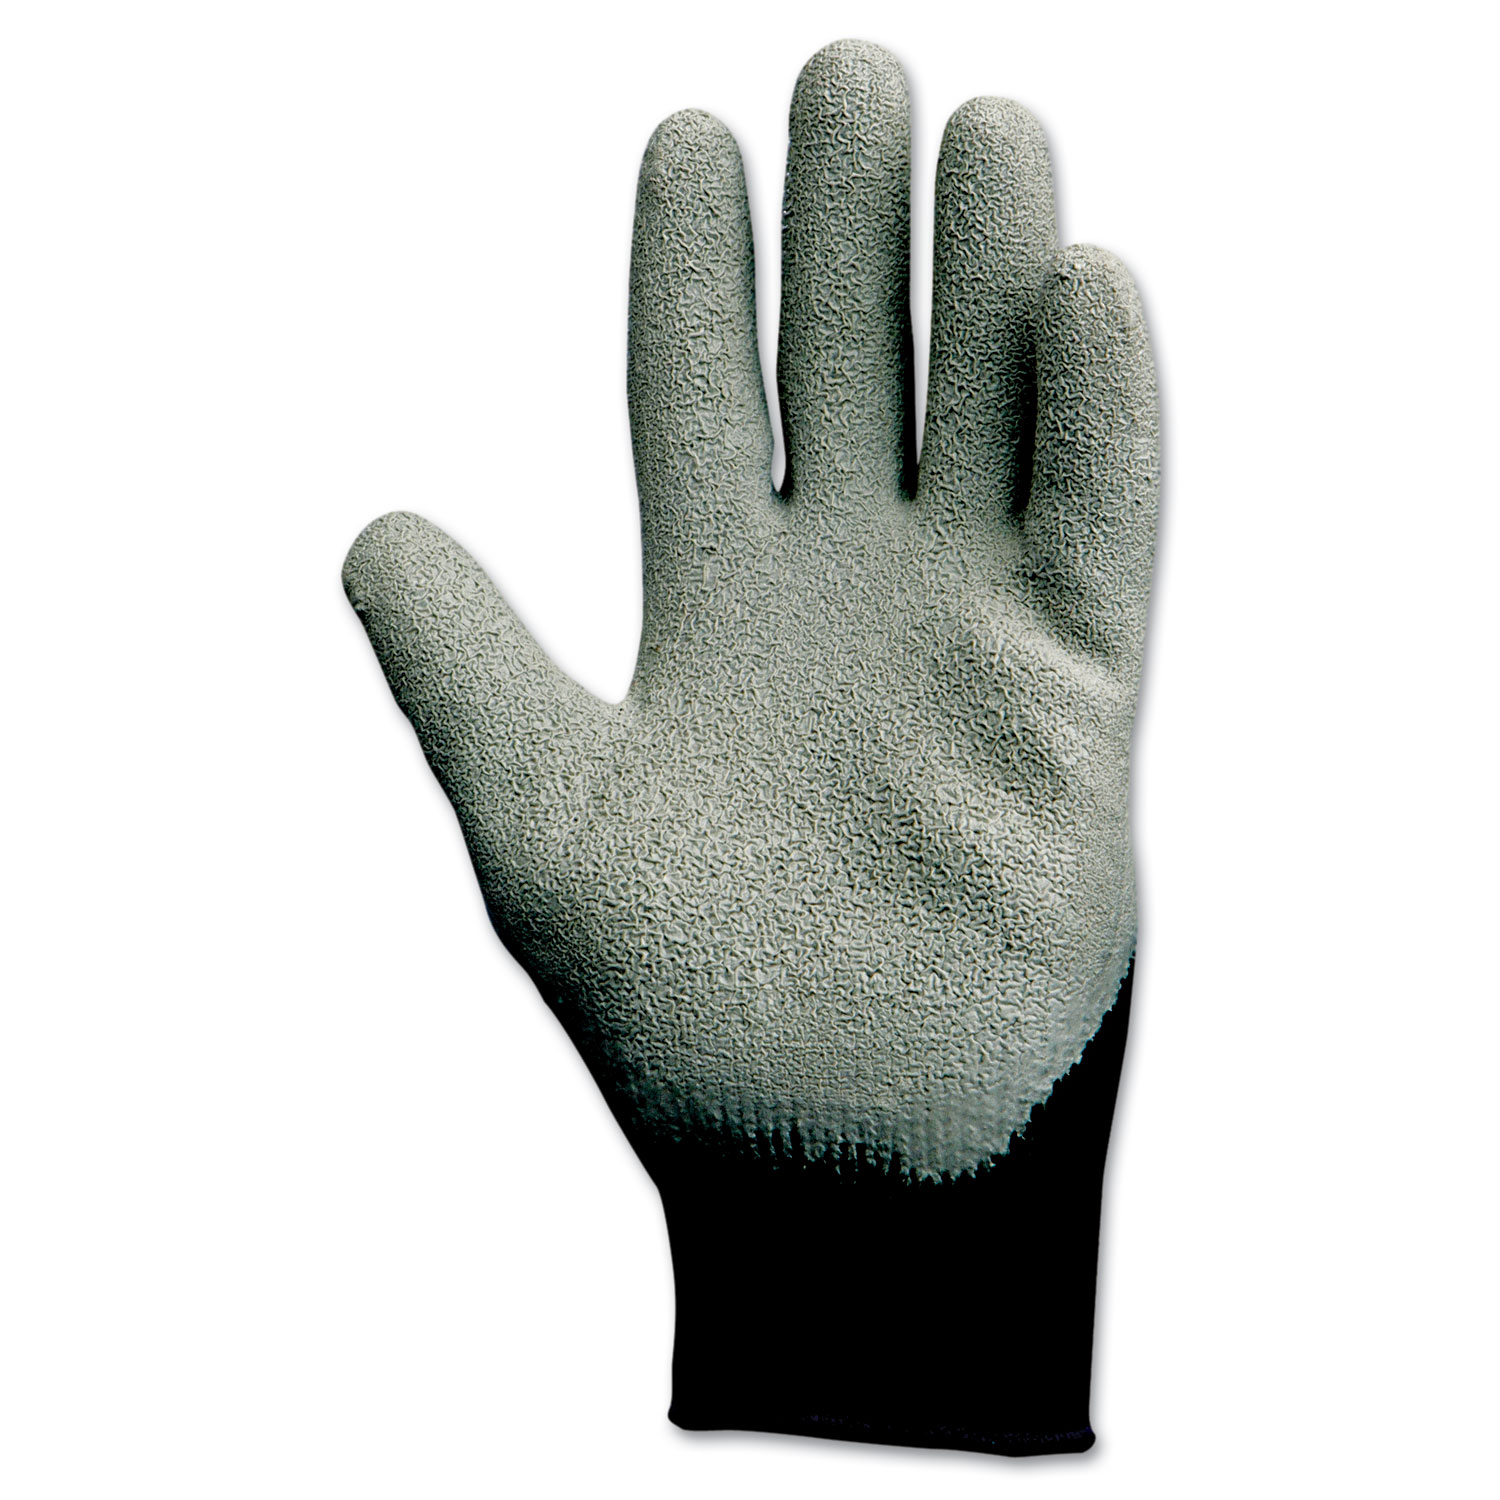  KleenGuard 97272 G40 Latex Coated Poly-Cotton Gloves, 250 mm Length, Large/Size 9, Gray, 12 Pairs (KCC97272) 